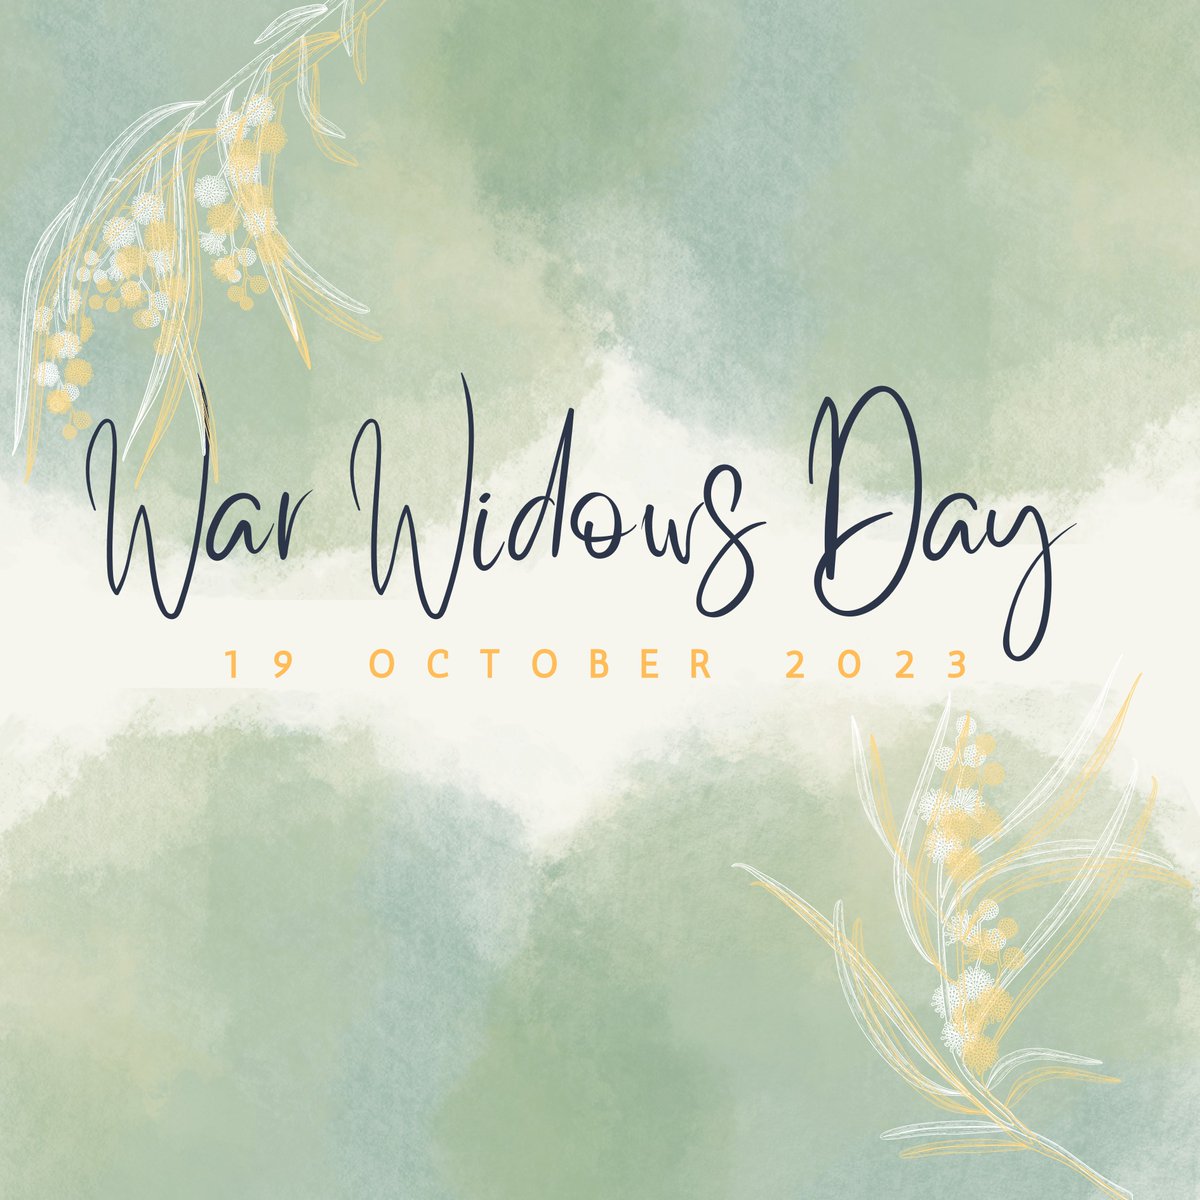 NSW Government has designated 19 October as a special day for the State to officially recognise War Widows and widowers of members of the Australian Defence Force for their contribution and personal sacrifice. Let's come together to honour those widowed by war and Defence service